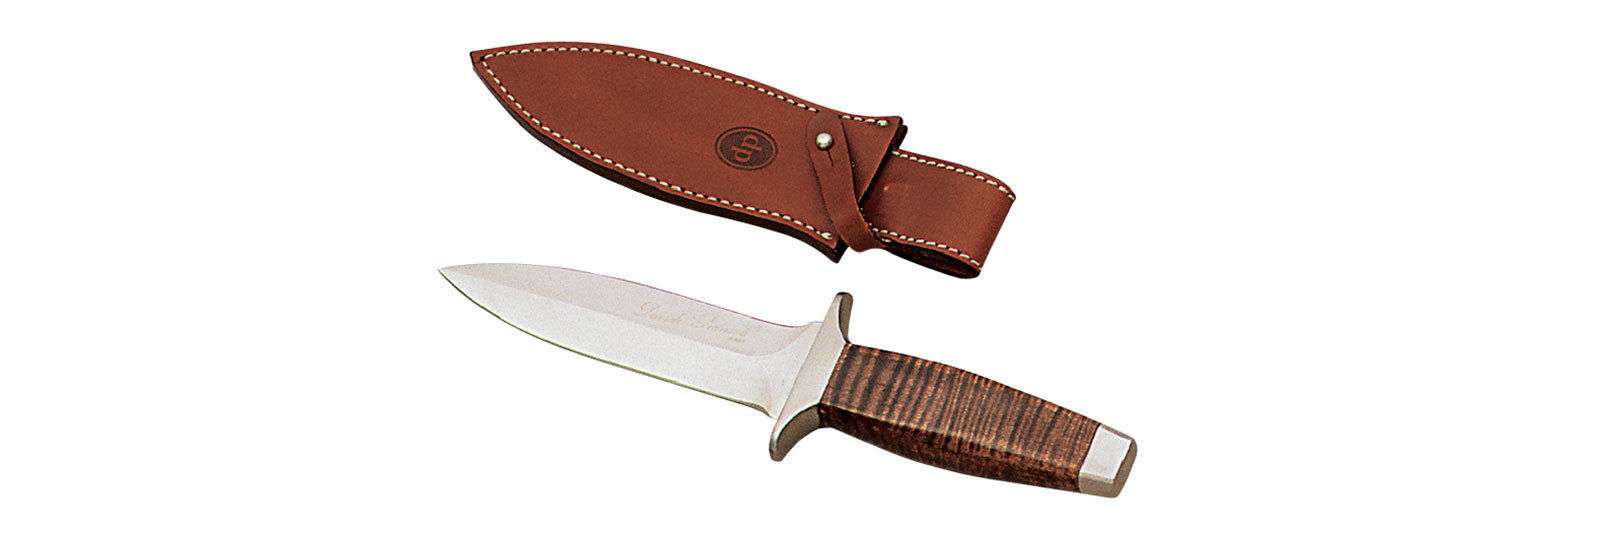 Boot maple Knife with sheath